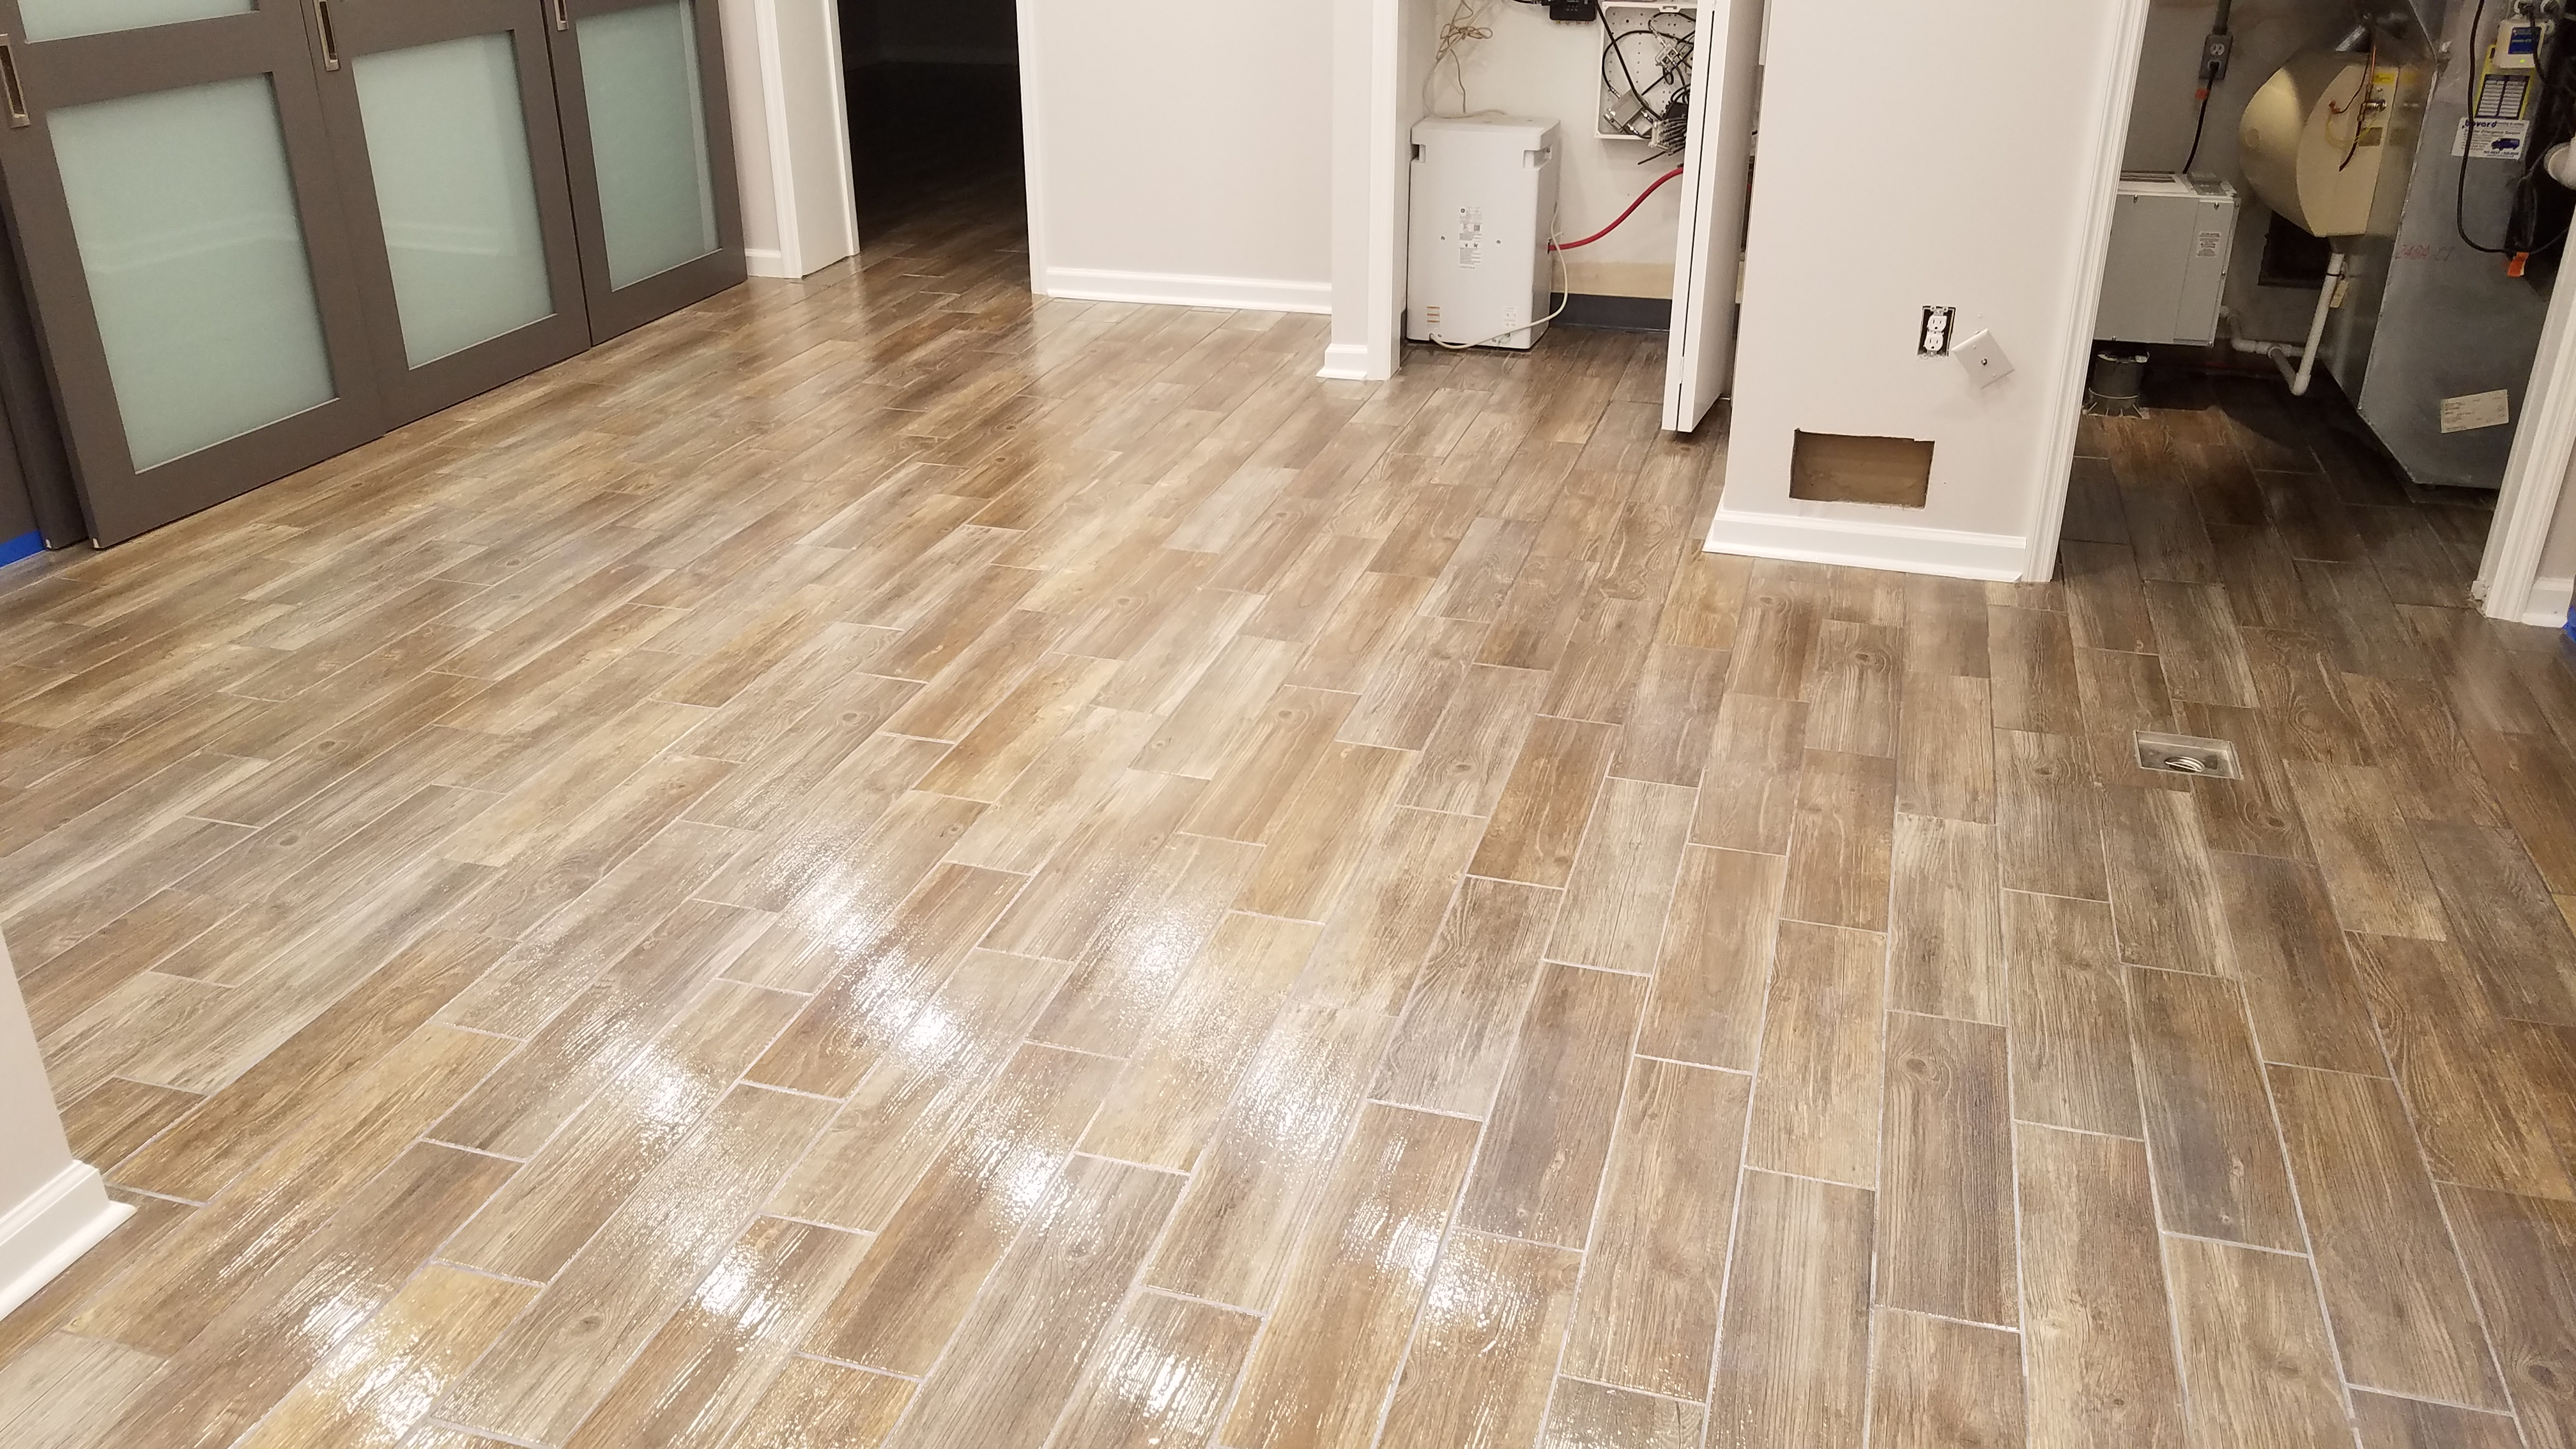 Finding The Best Tile Sealer For Ceramic And Porcelain Floors with sizing 4032 X 2268